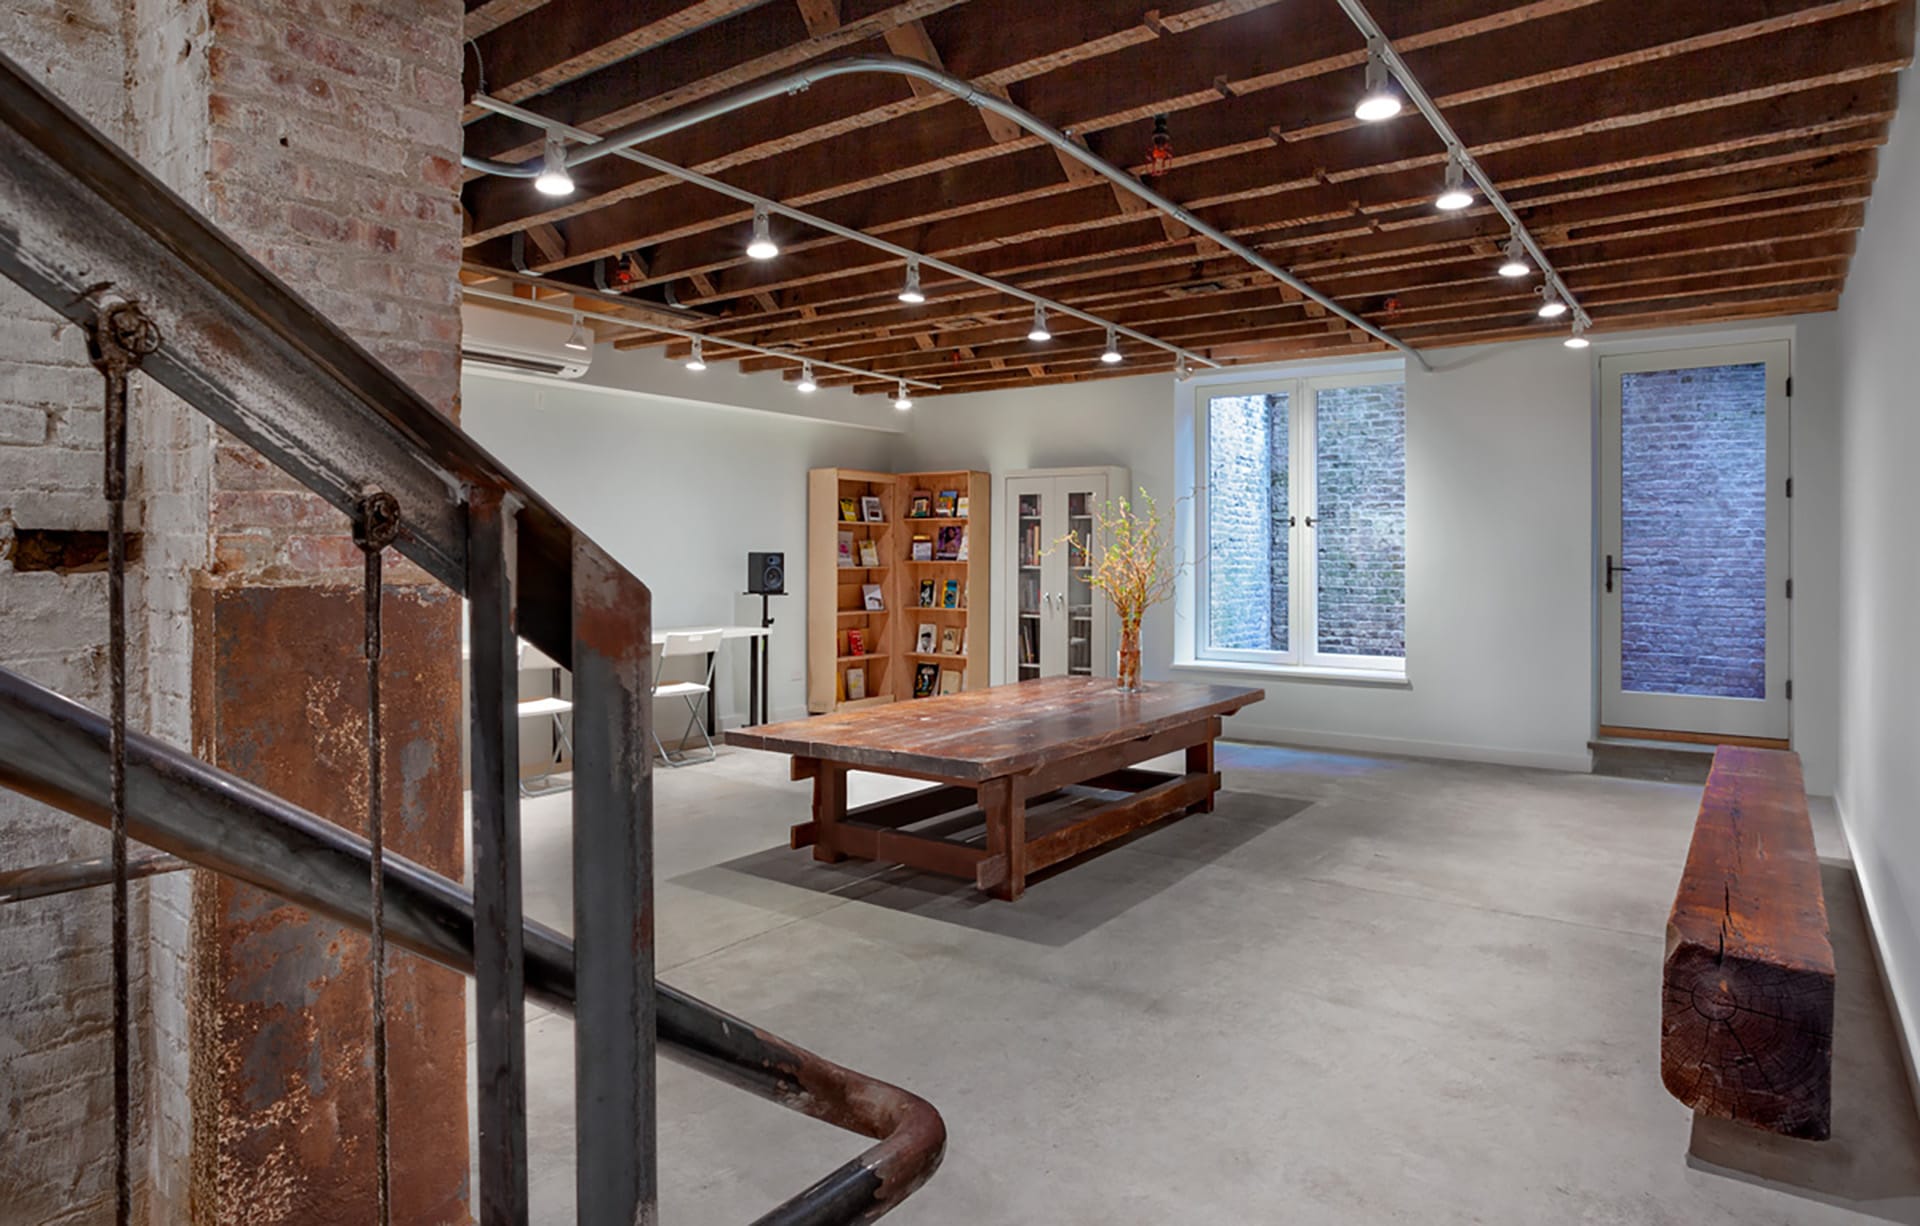 Gathering and research space with exposed beam ceilings, track lights, antique wood bench and table, and cement floors.